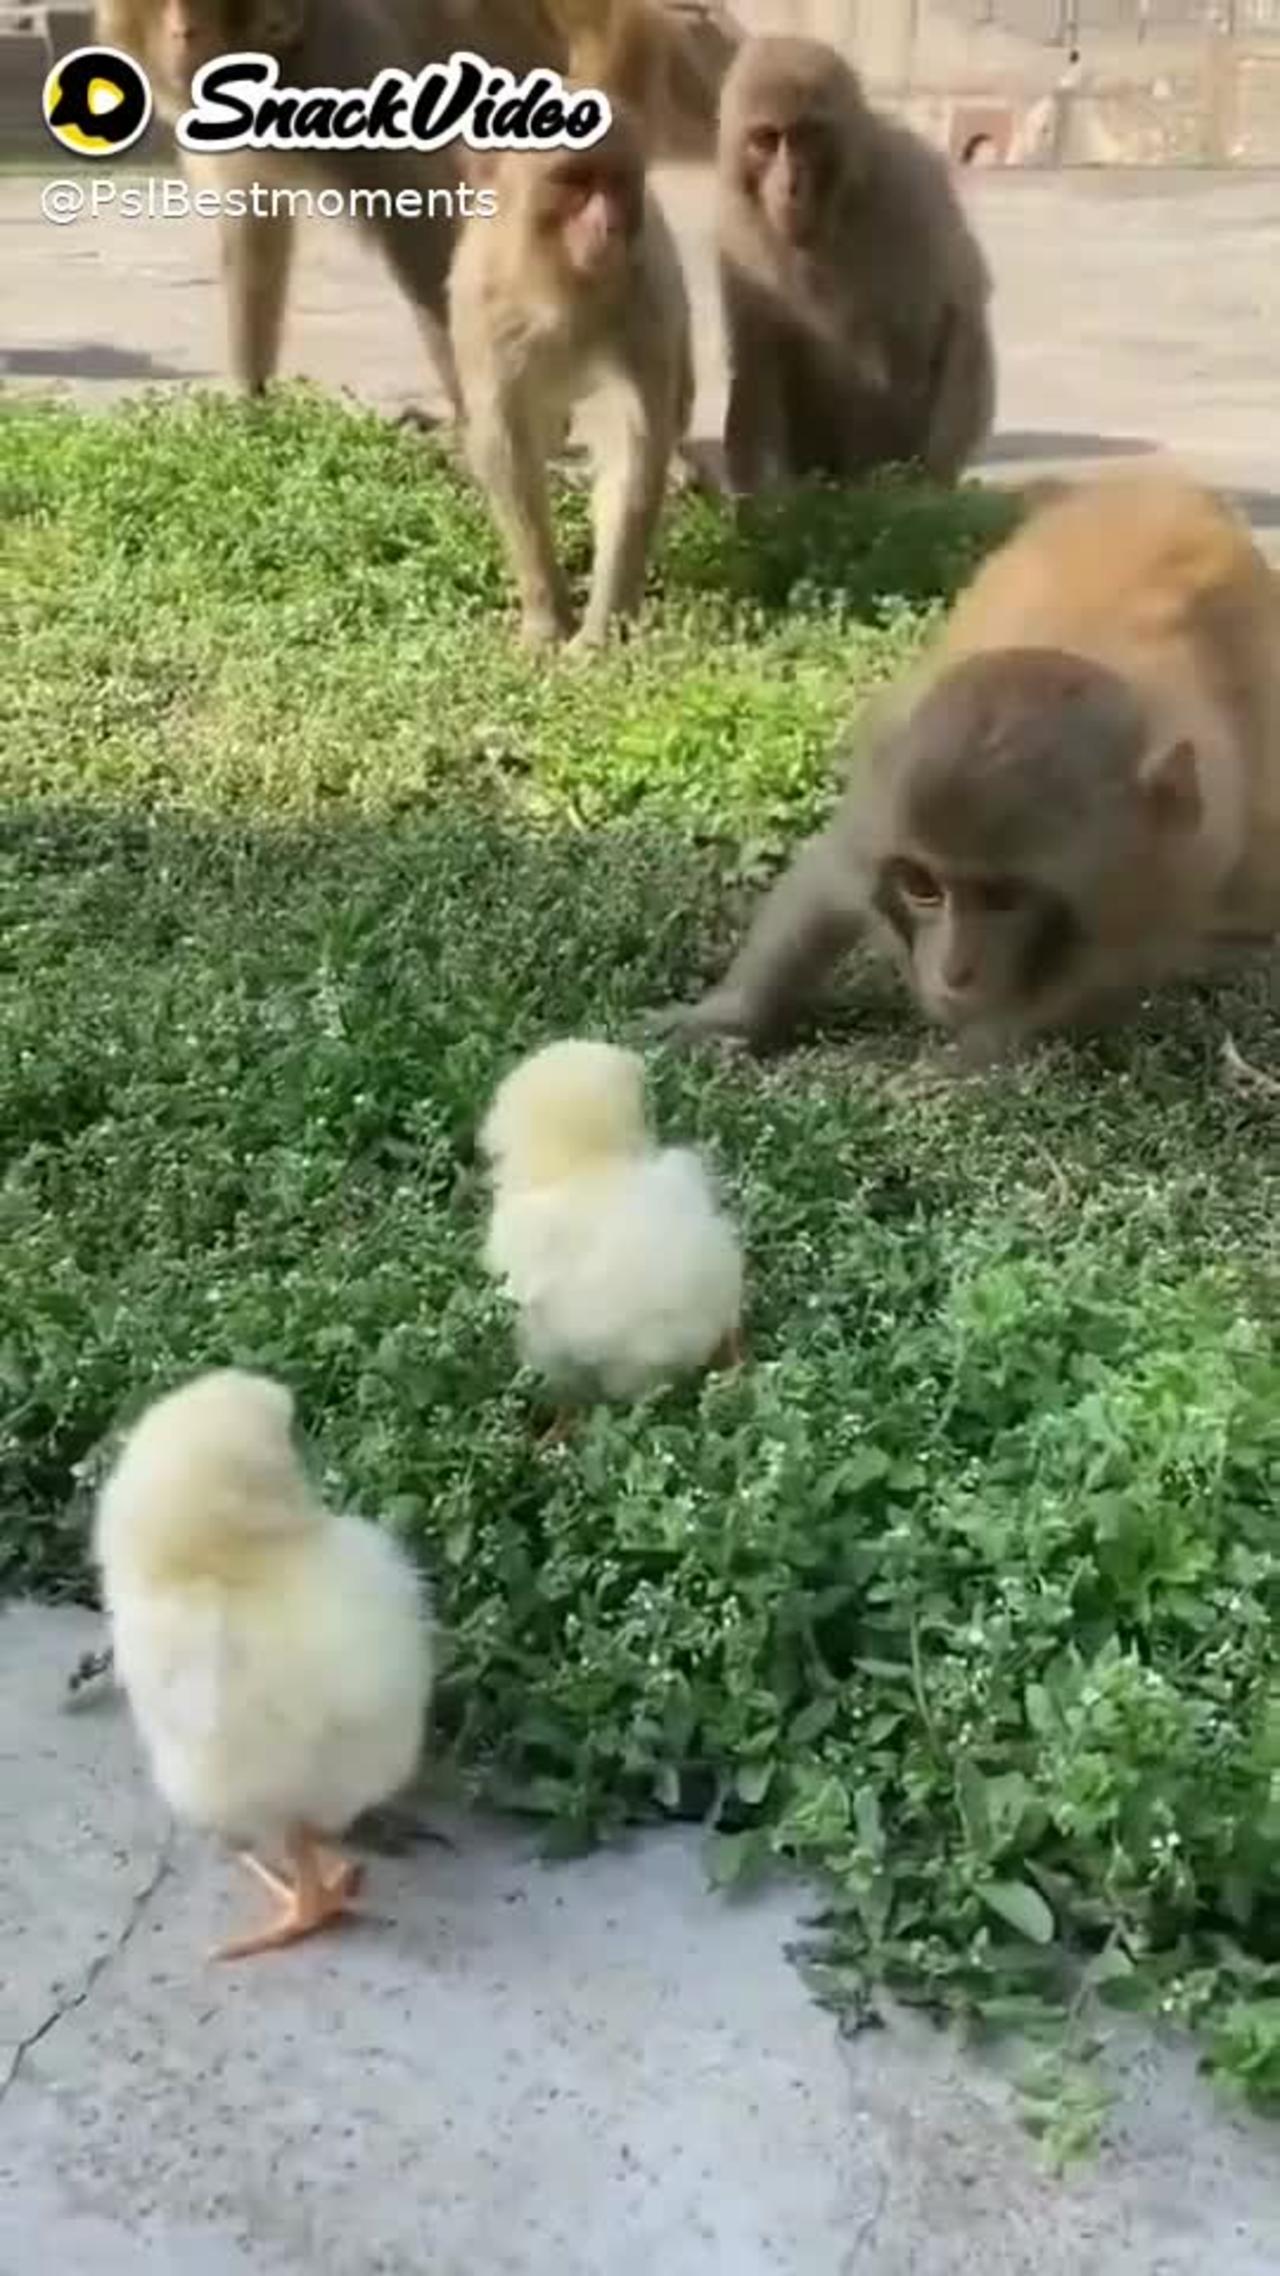 Monkey playing with chicks🤭🤭🤭